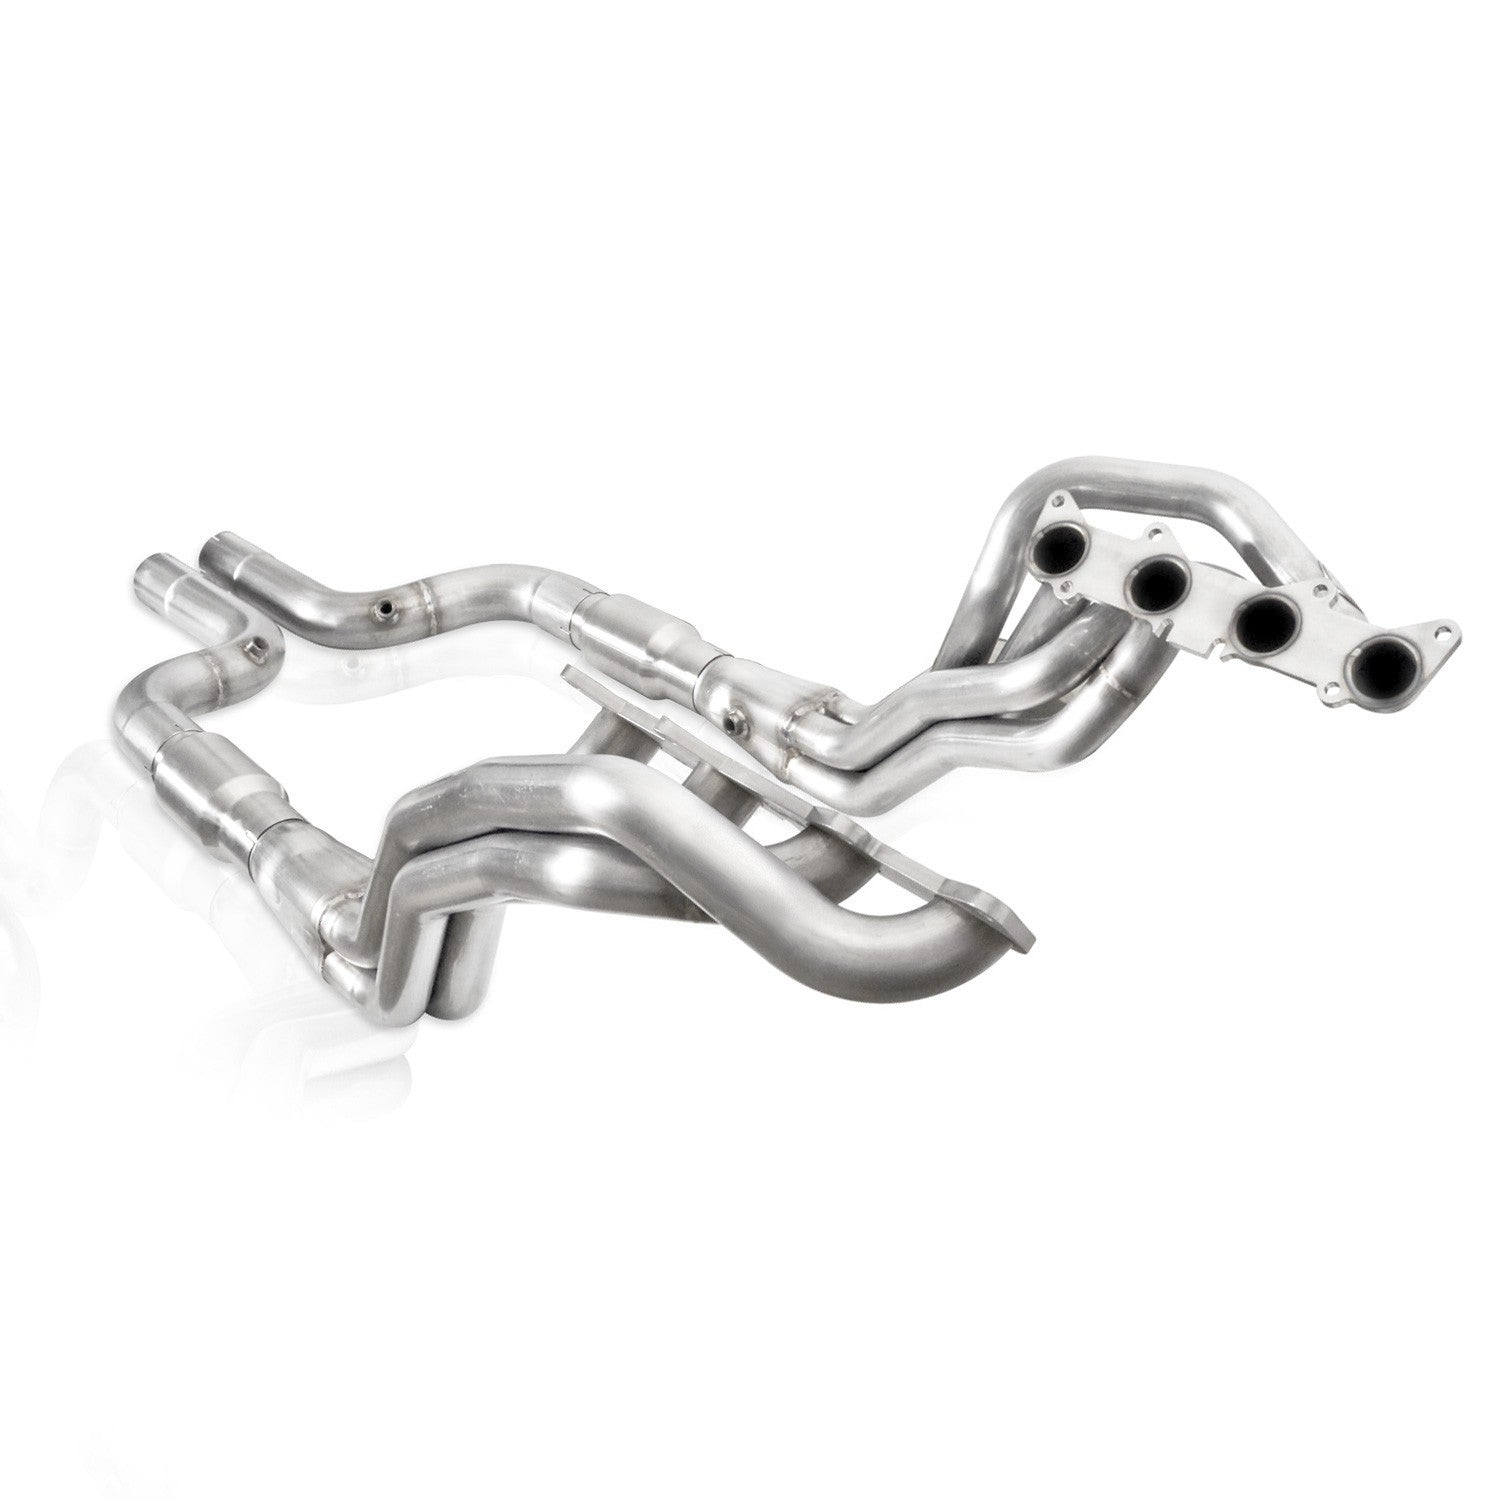 Stainless Works SP Ford Mustang GT 2015-17 Headers 1-7/8" Catted Aftermarket Connect SM15H3CATLG